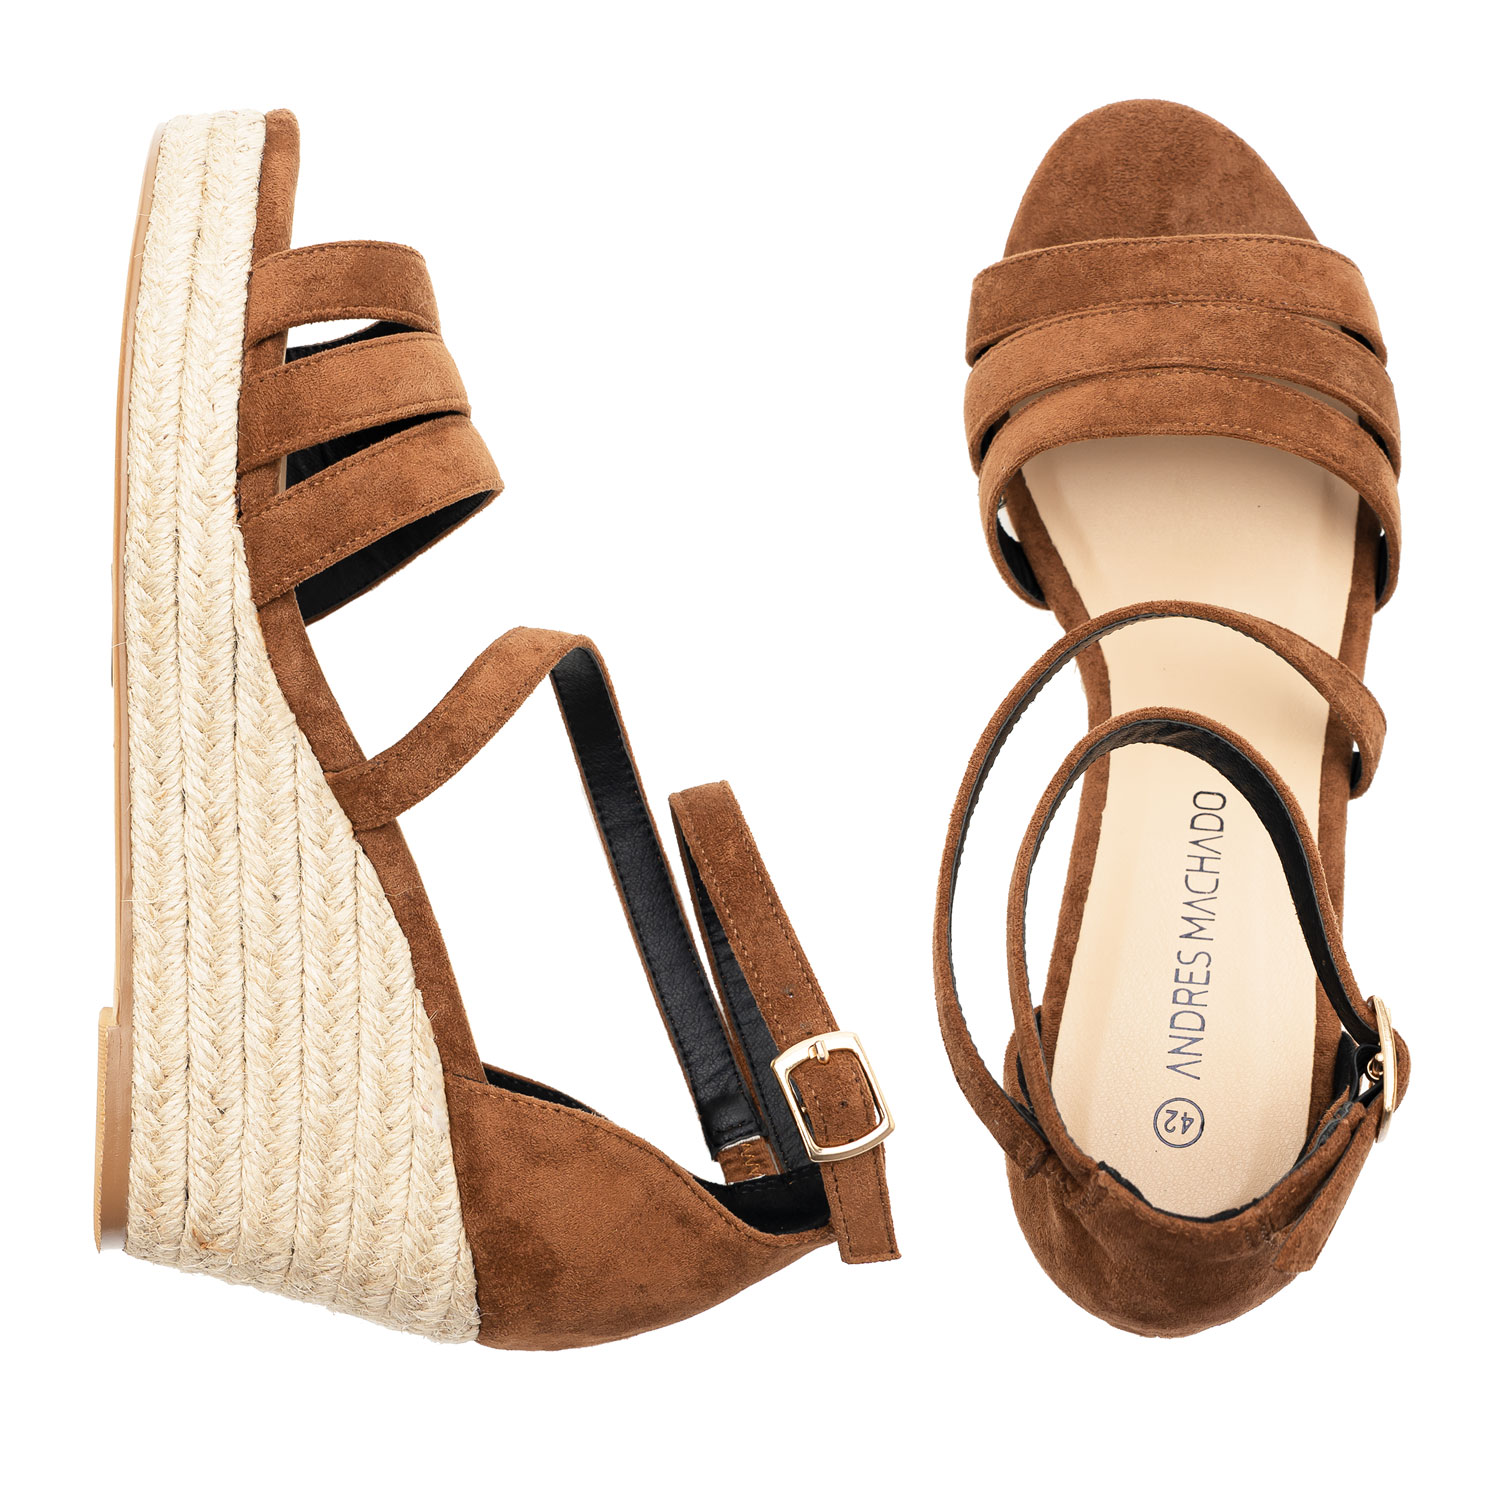 Brown Faux Suede Espadrilles with Jute Wedge 